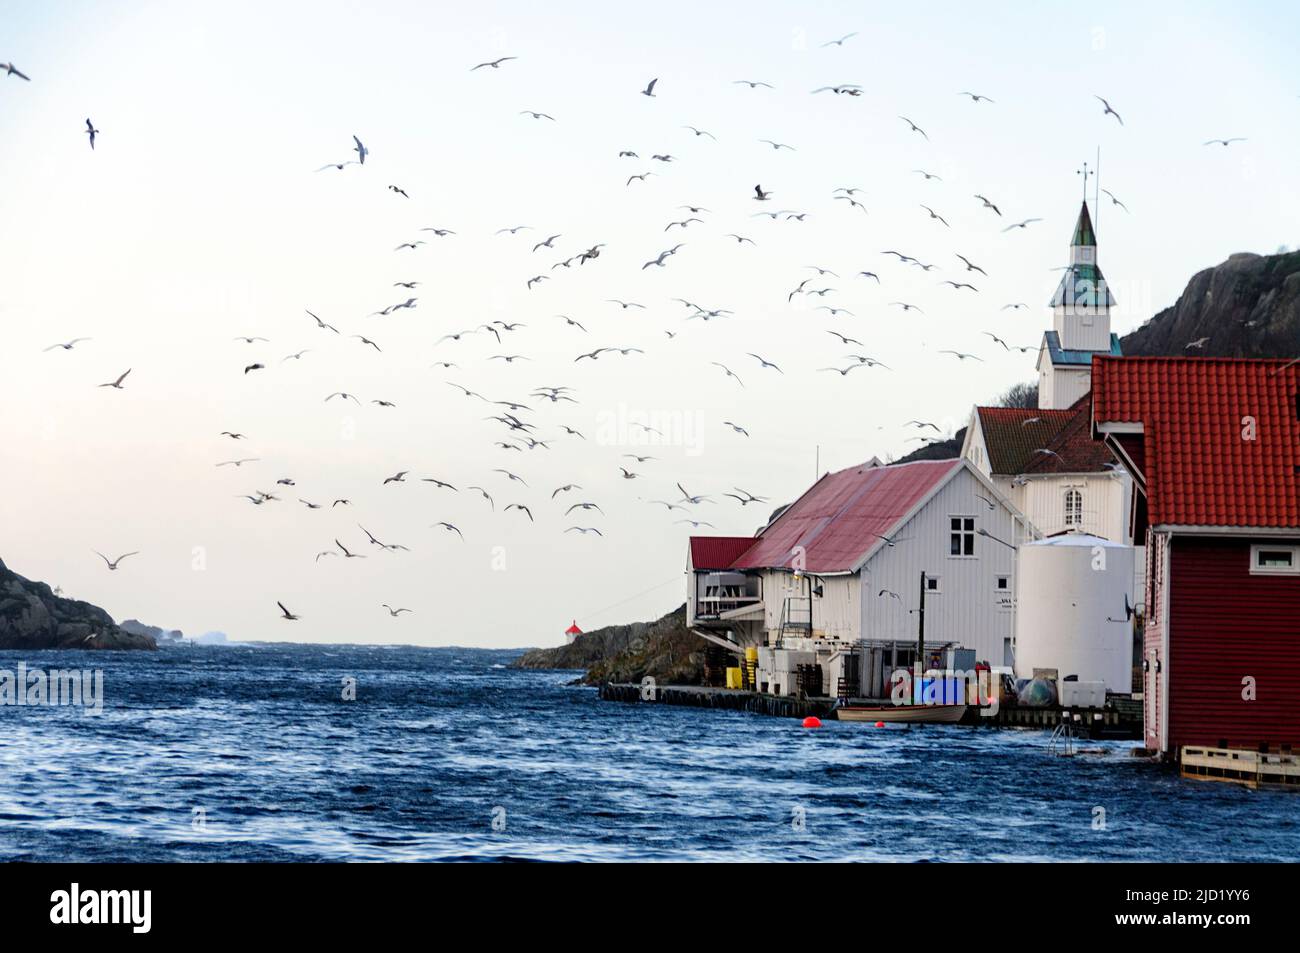 The village of Kirkehamn at the island of Hidra (Agder) in south-western Norway on a stormy winter's day. Stock Photo